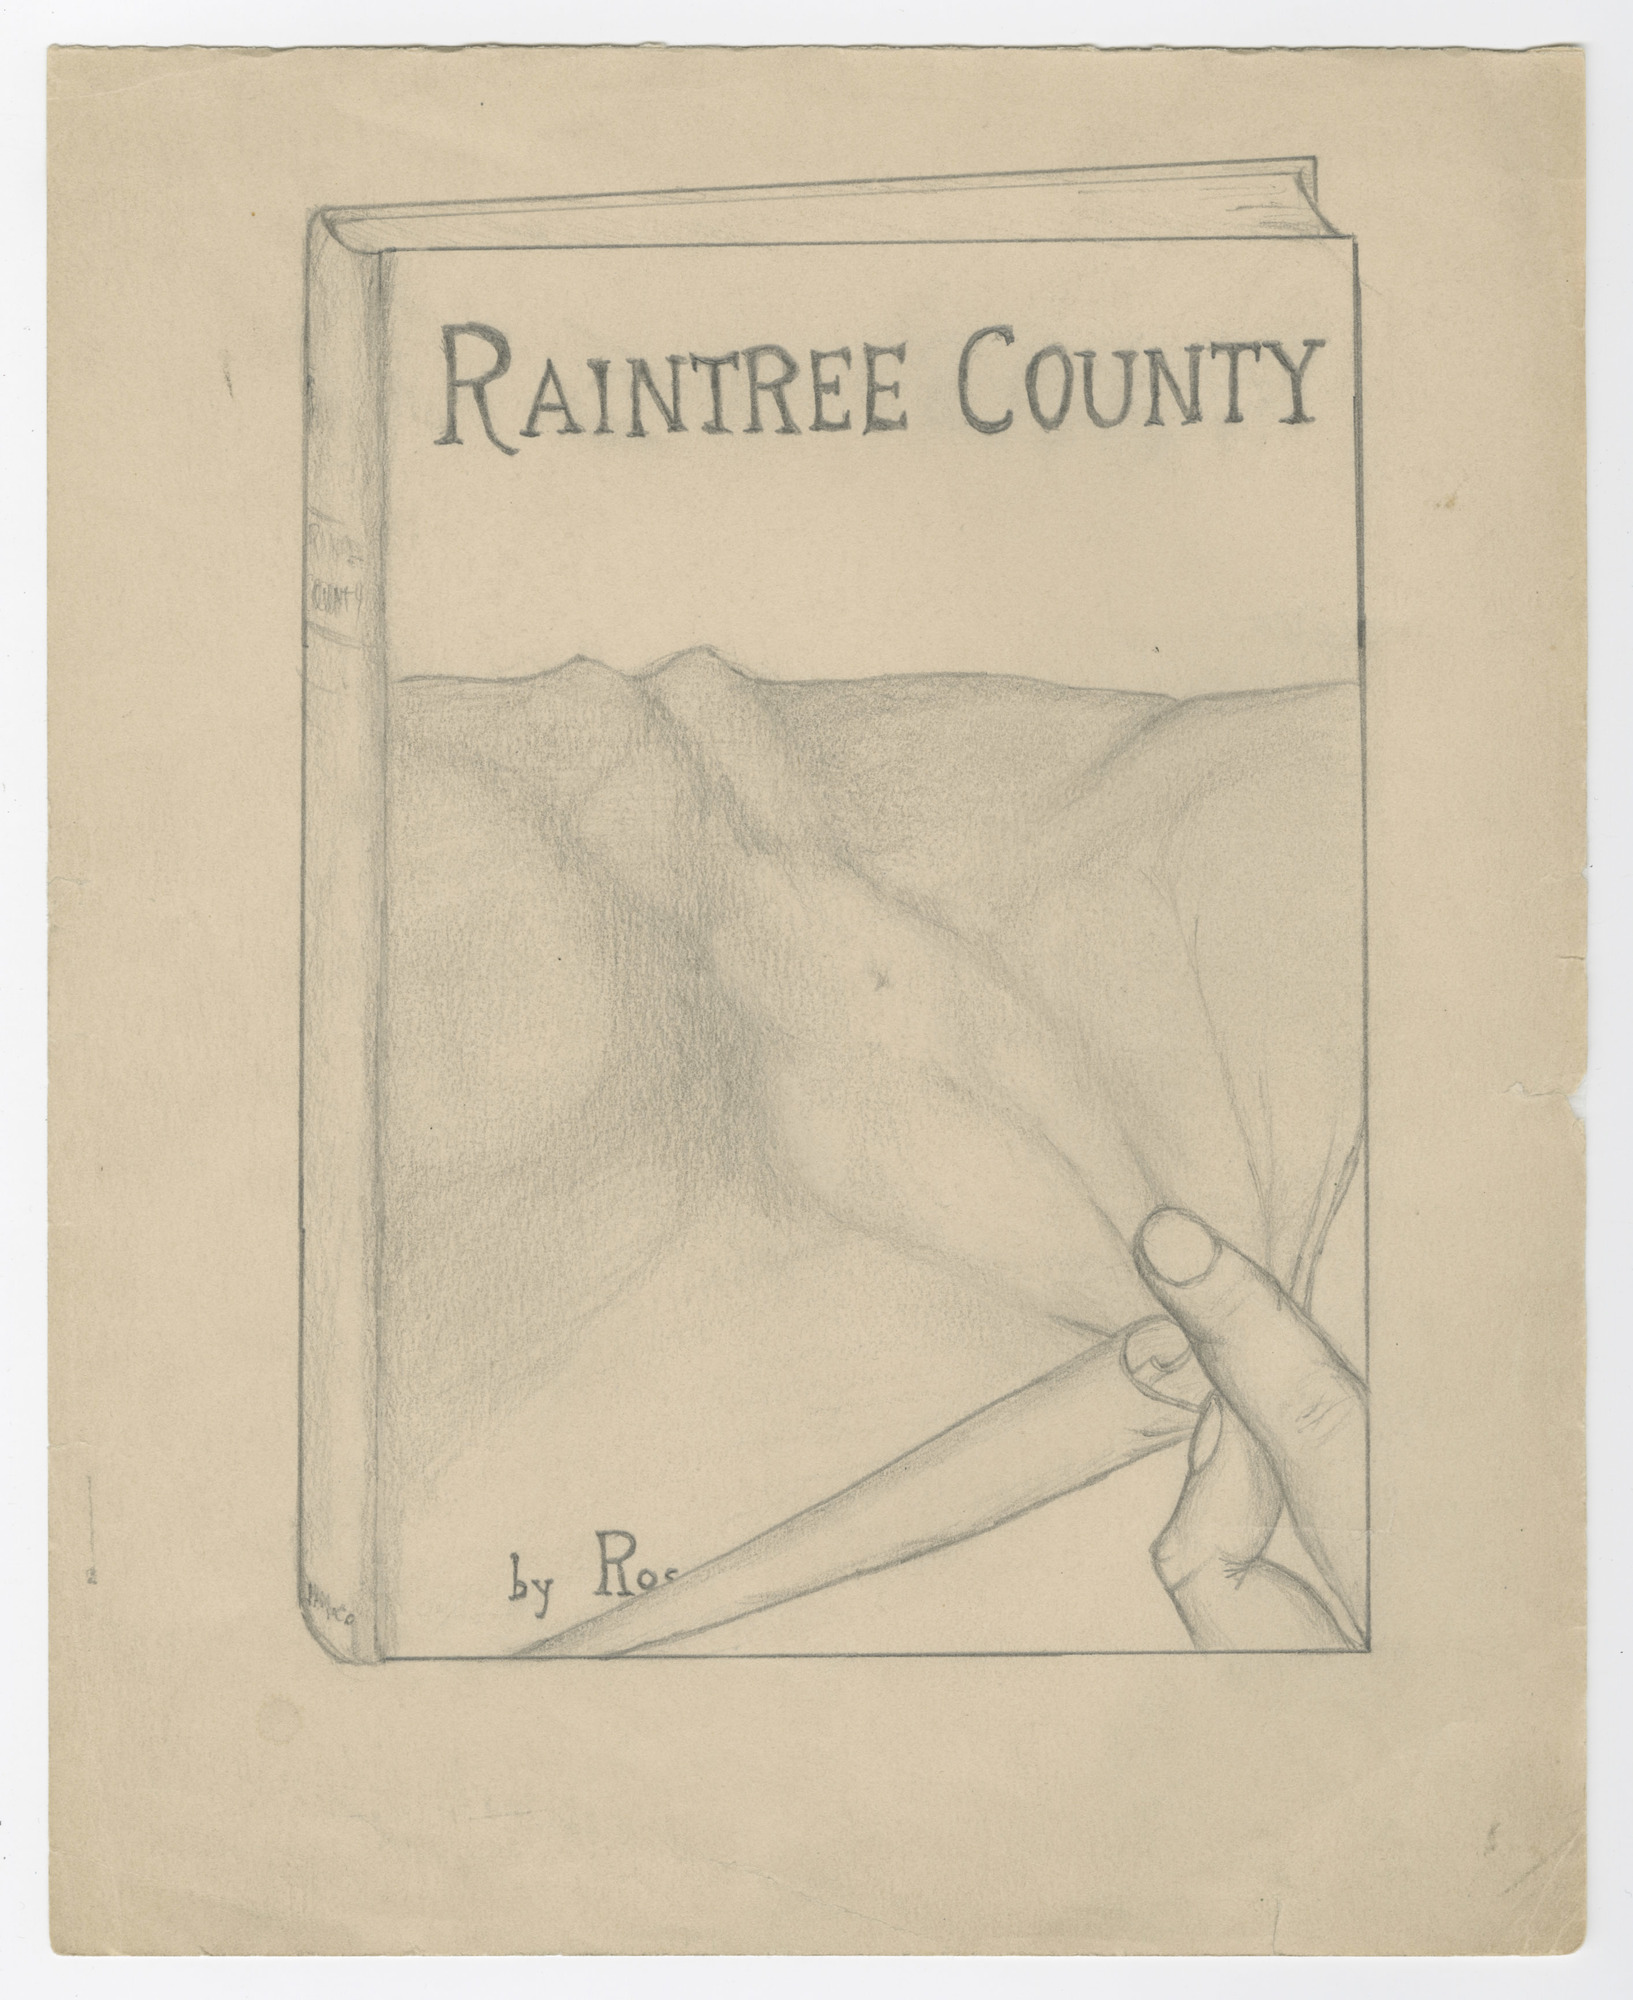 From the manuscript for "Raintree County"